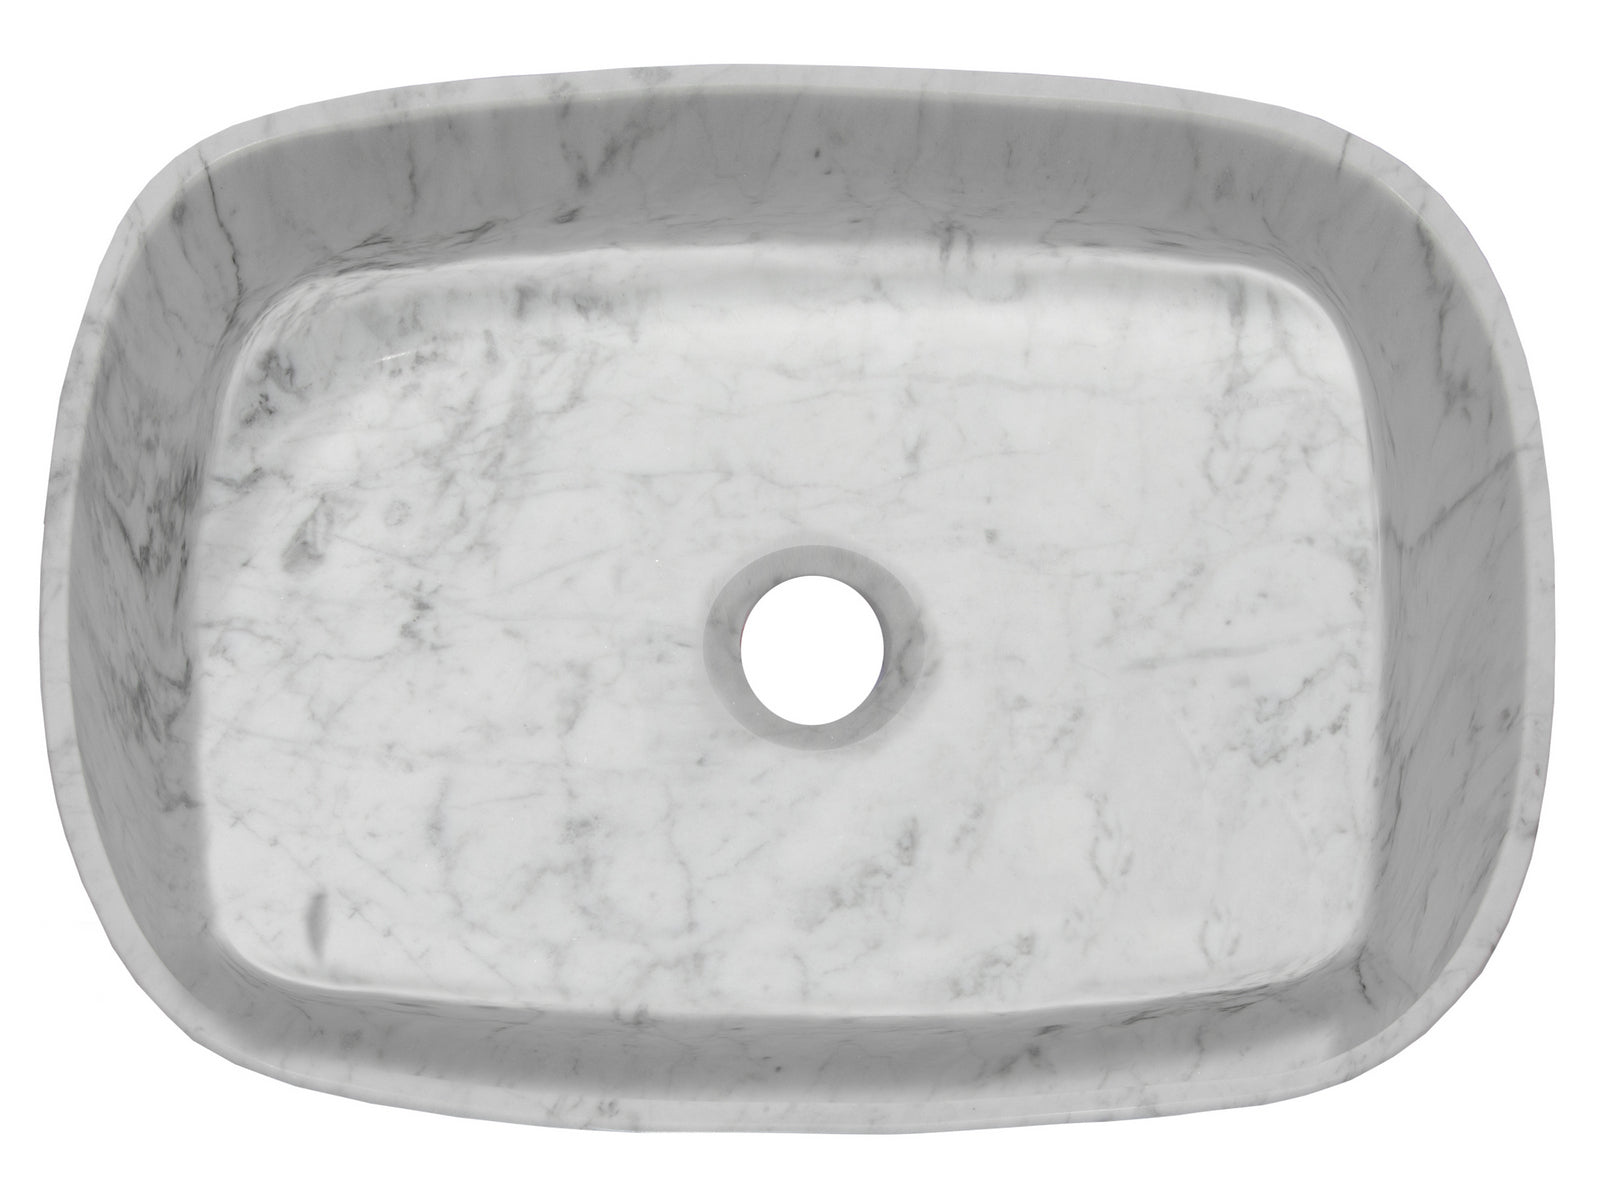 Rounded Rectangular Vessel Sink in Carrara Marble